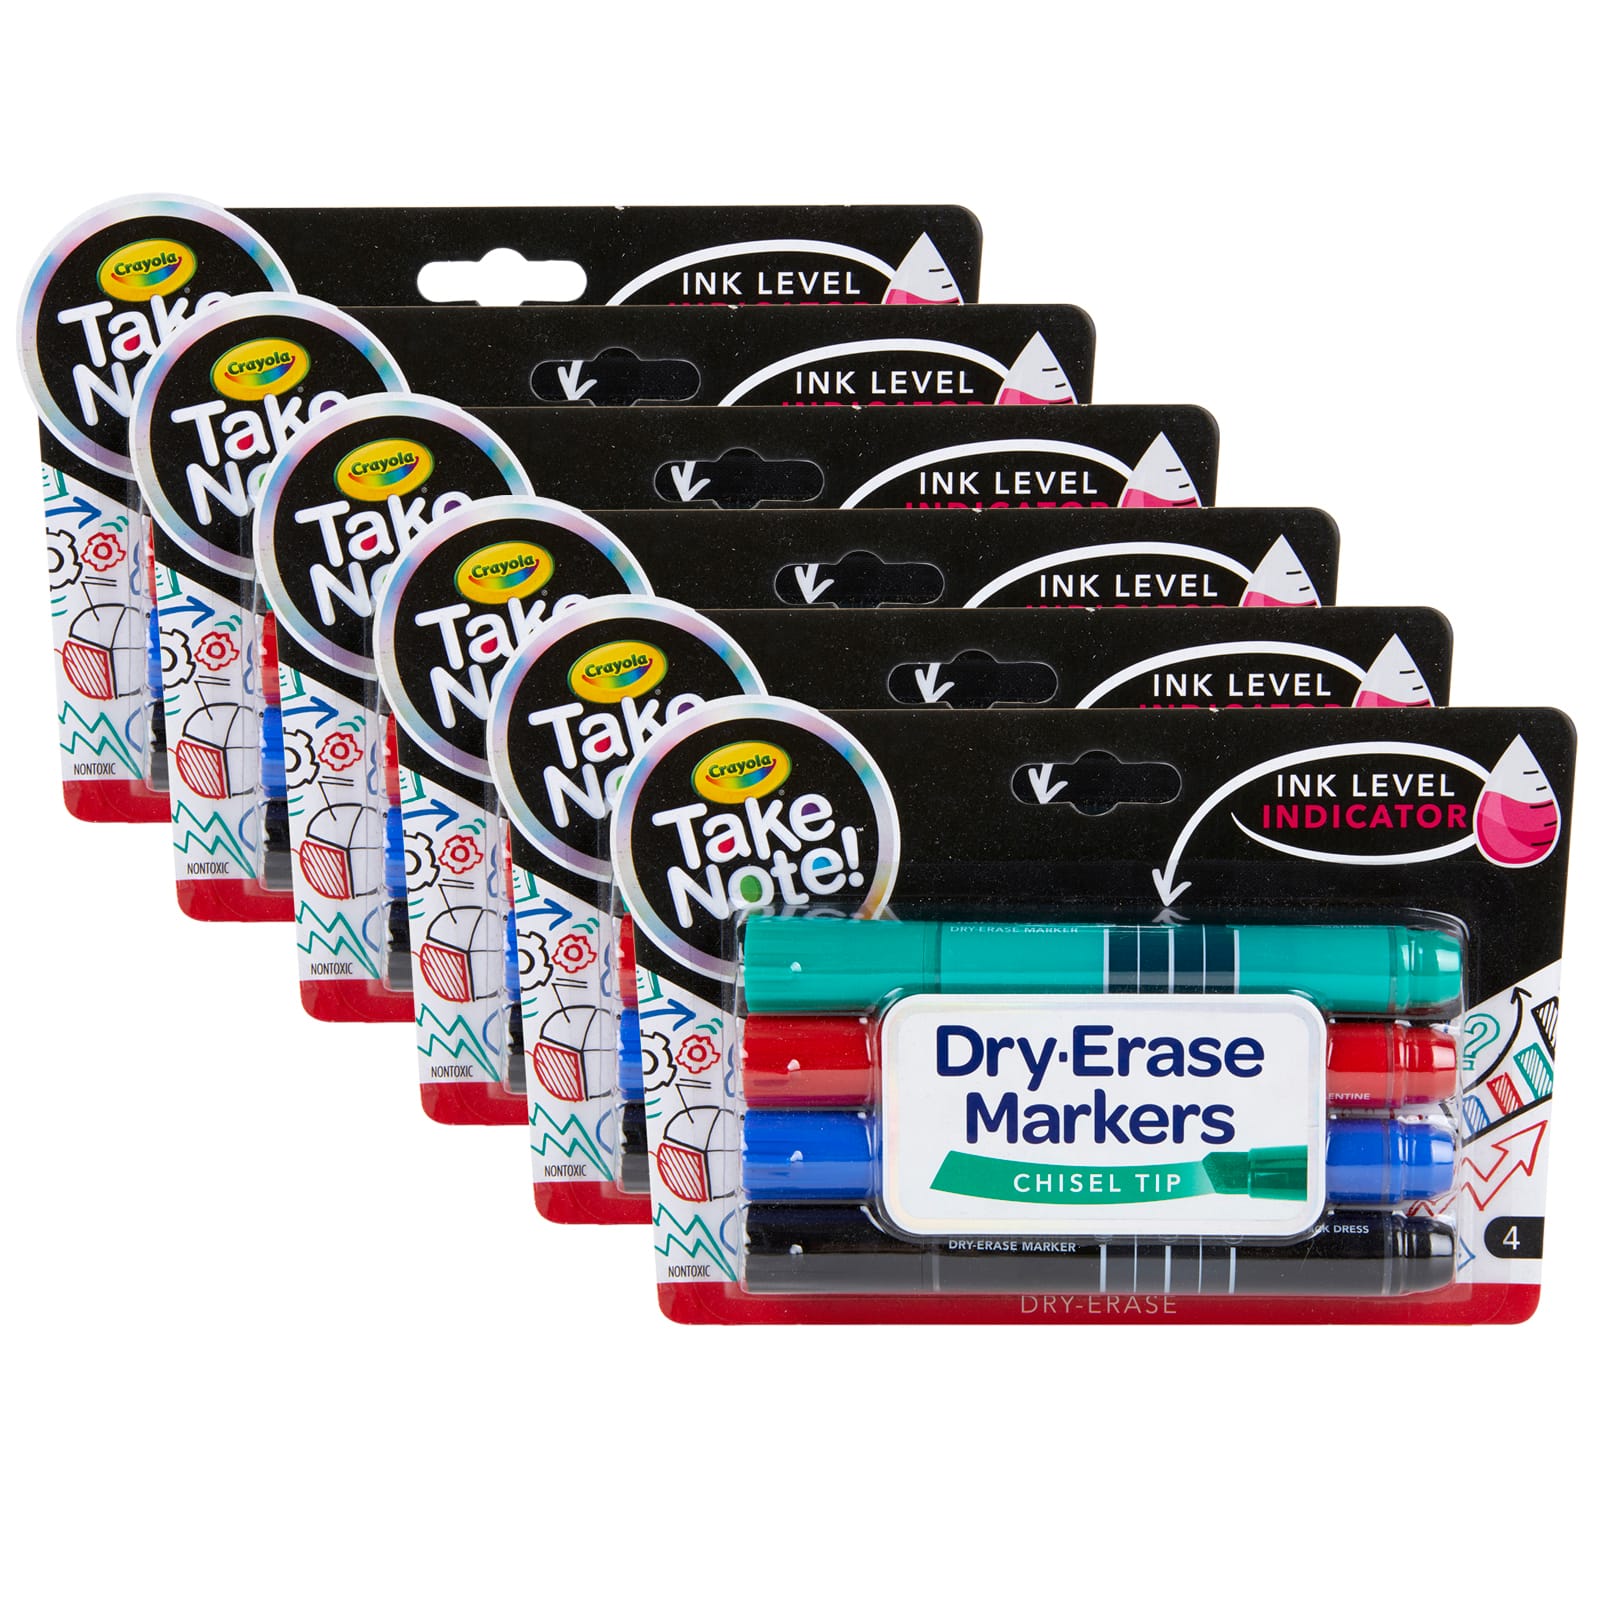 55% Off Crayola Take Note Dry Erase Markers 12 Count